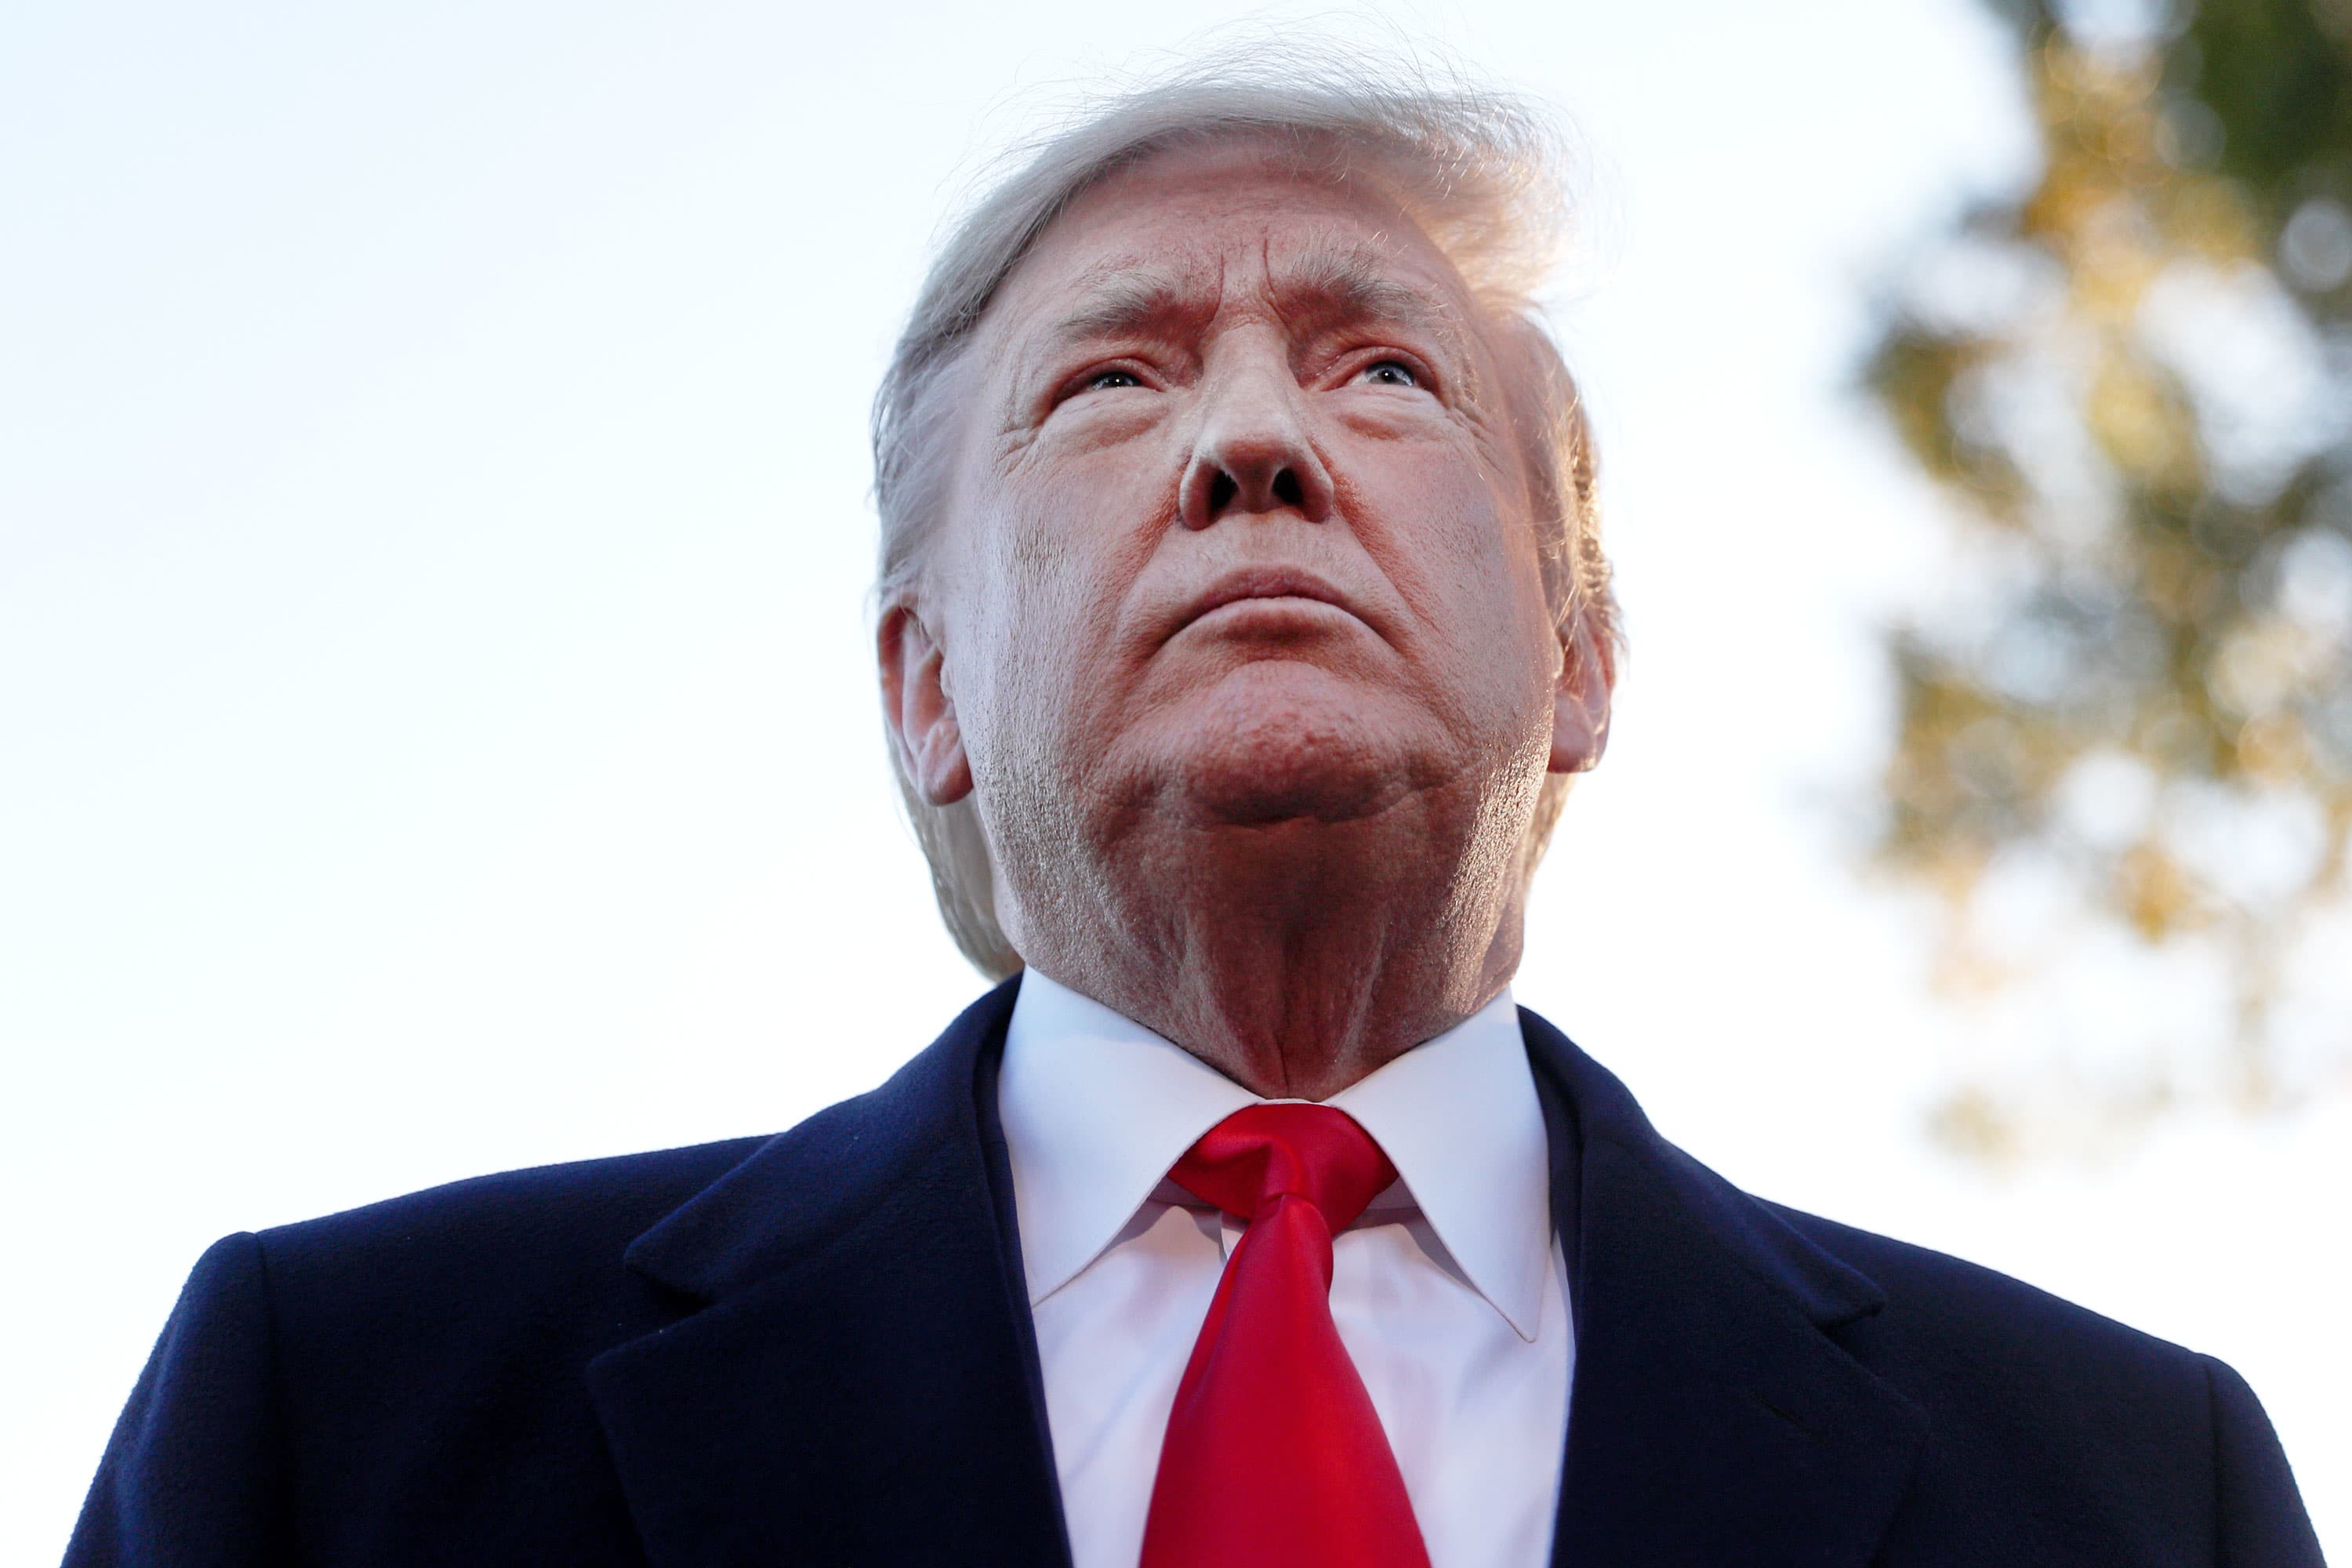 Trump rages on GOP leaders, even as advisers urge him to target attacks on Biden